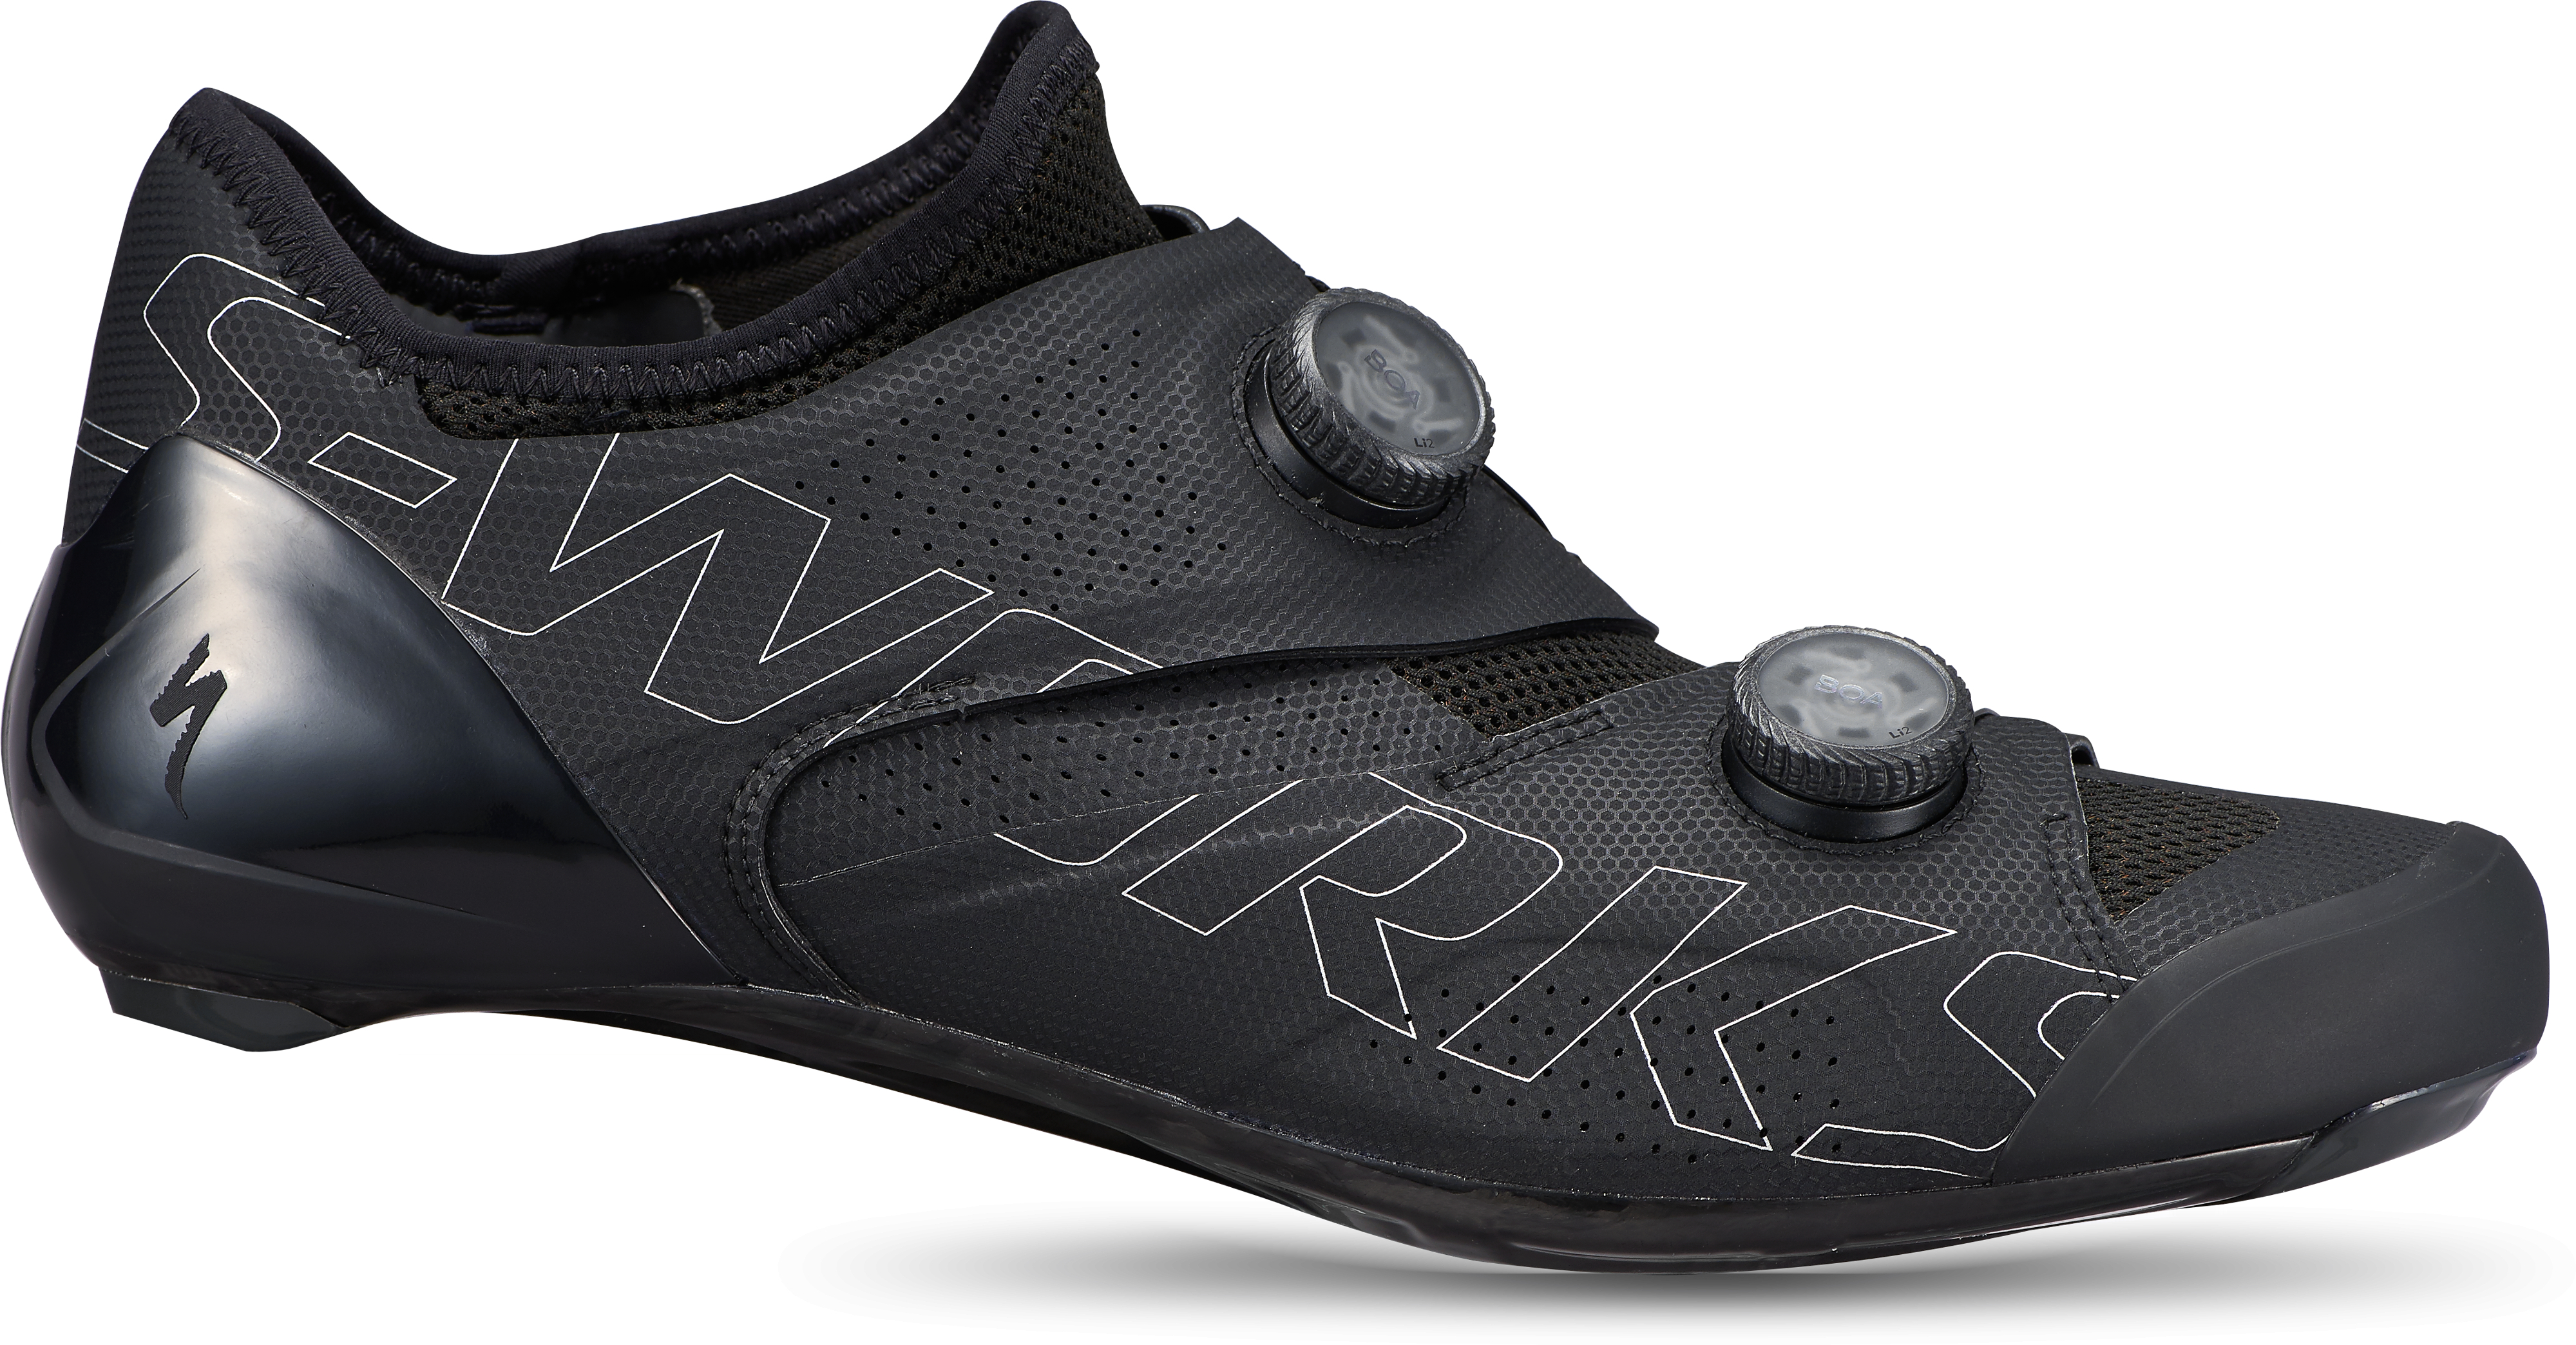 Specialized SWorks Ares Road Shoes Black